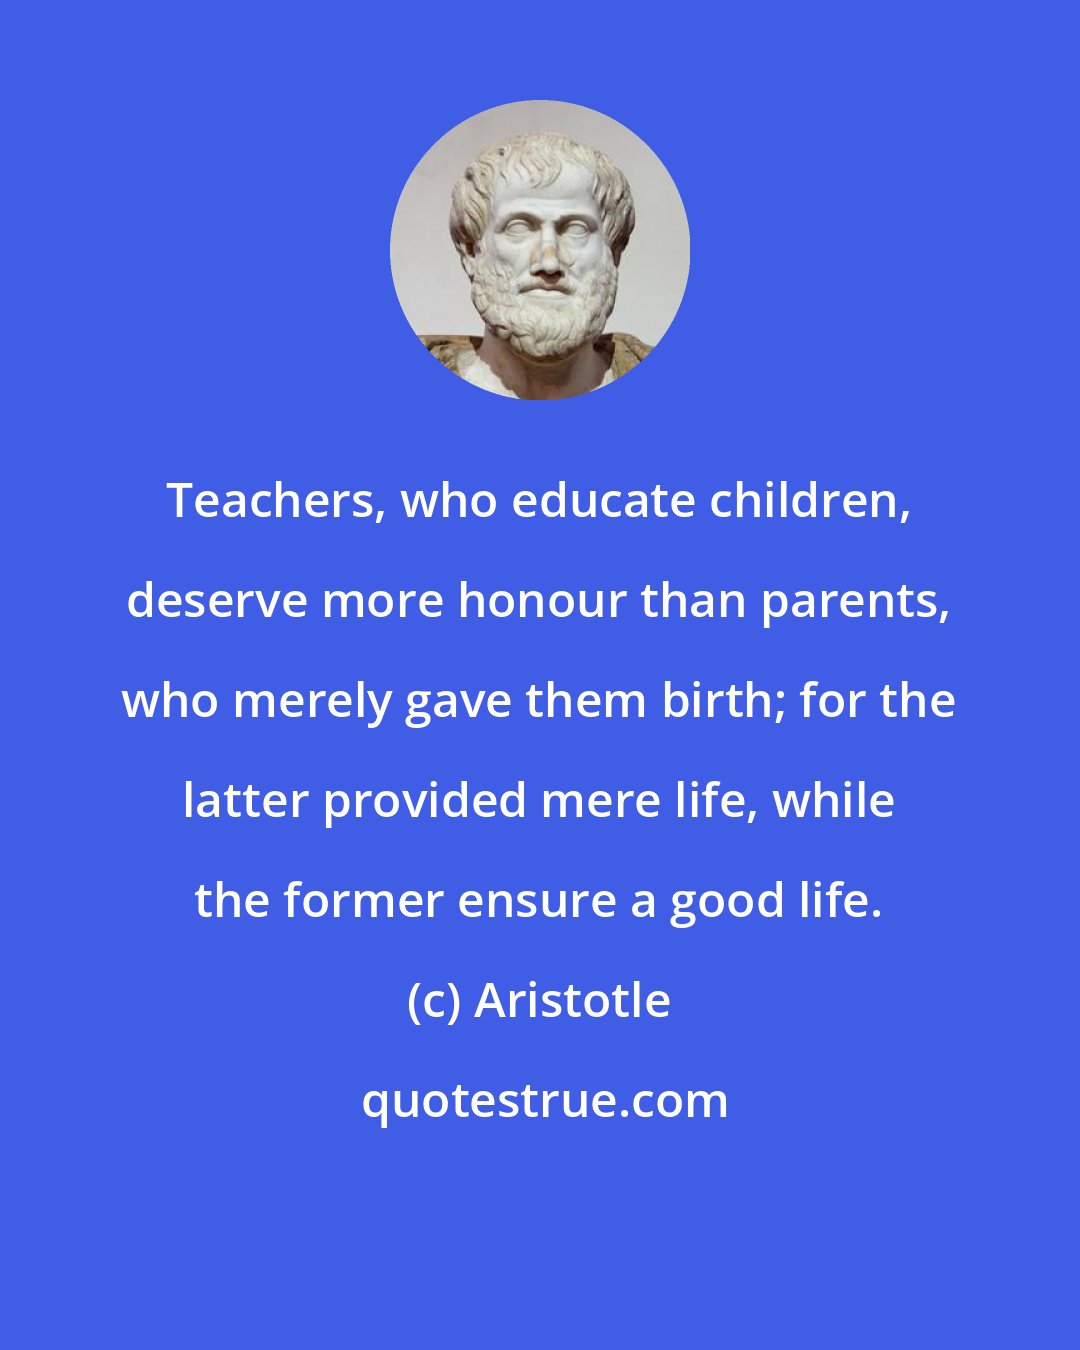 Aristotle: Teachers, who educate children, deserve more honour than parents, who merely gave them birth; for the latter provided mere life, while the former ensure a good life.